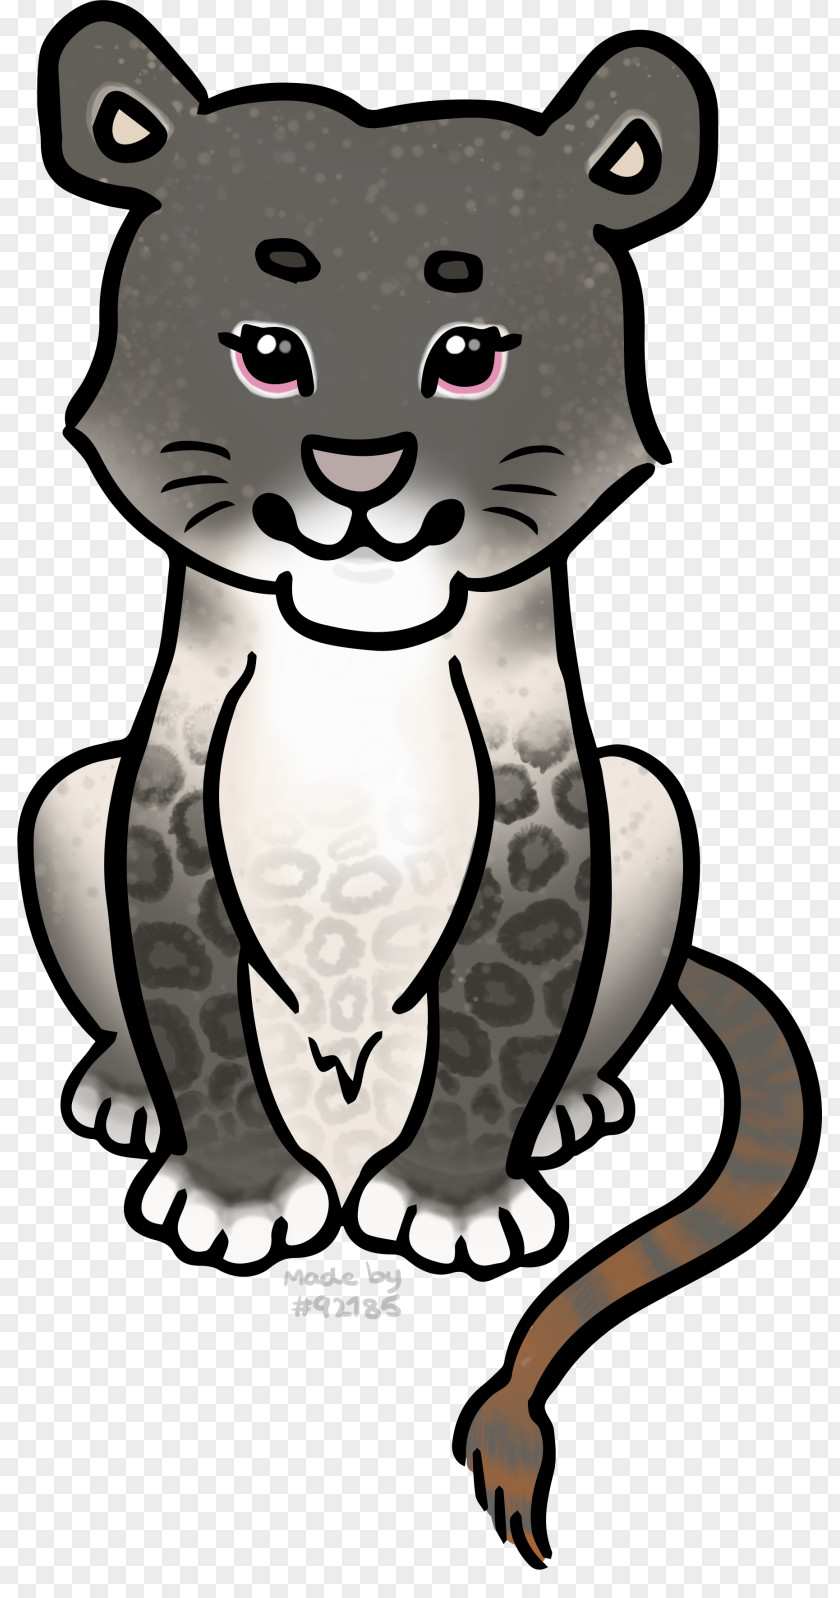 Cat Whiskers Rodent Procyonidae Clip Art PNG